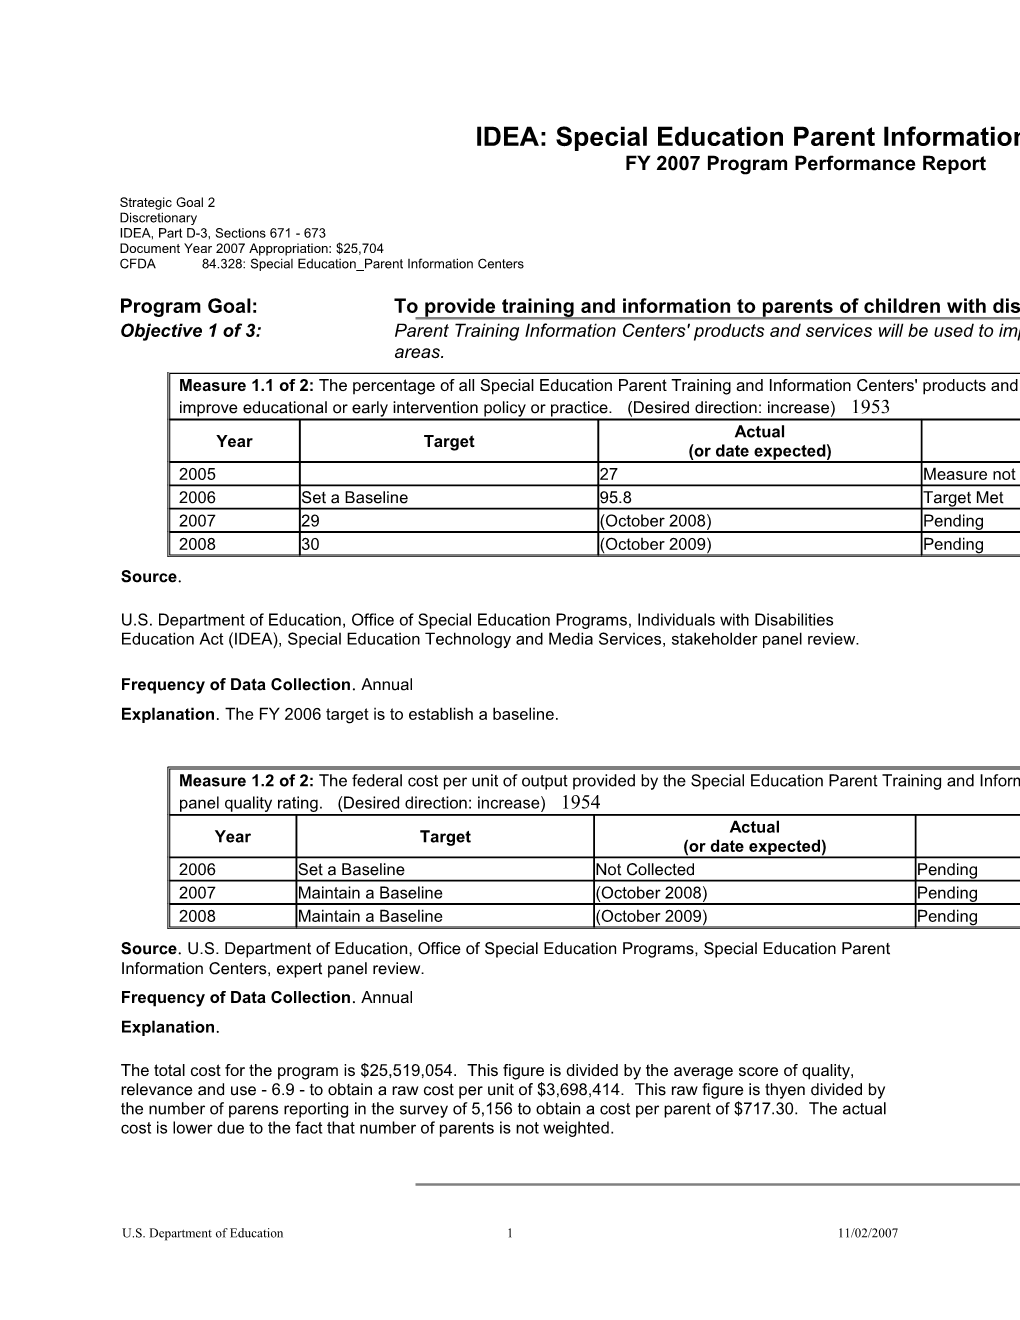 Special Education Parent Information Centers FY 2007 Program Performance Report (MS Word)